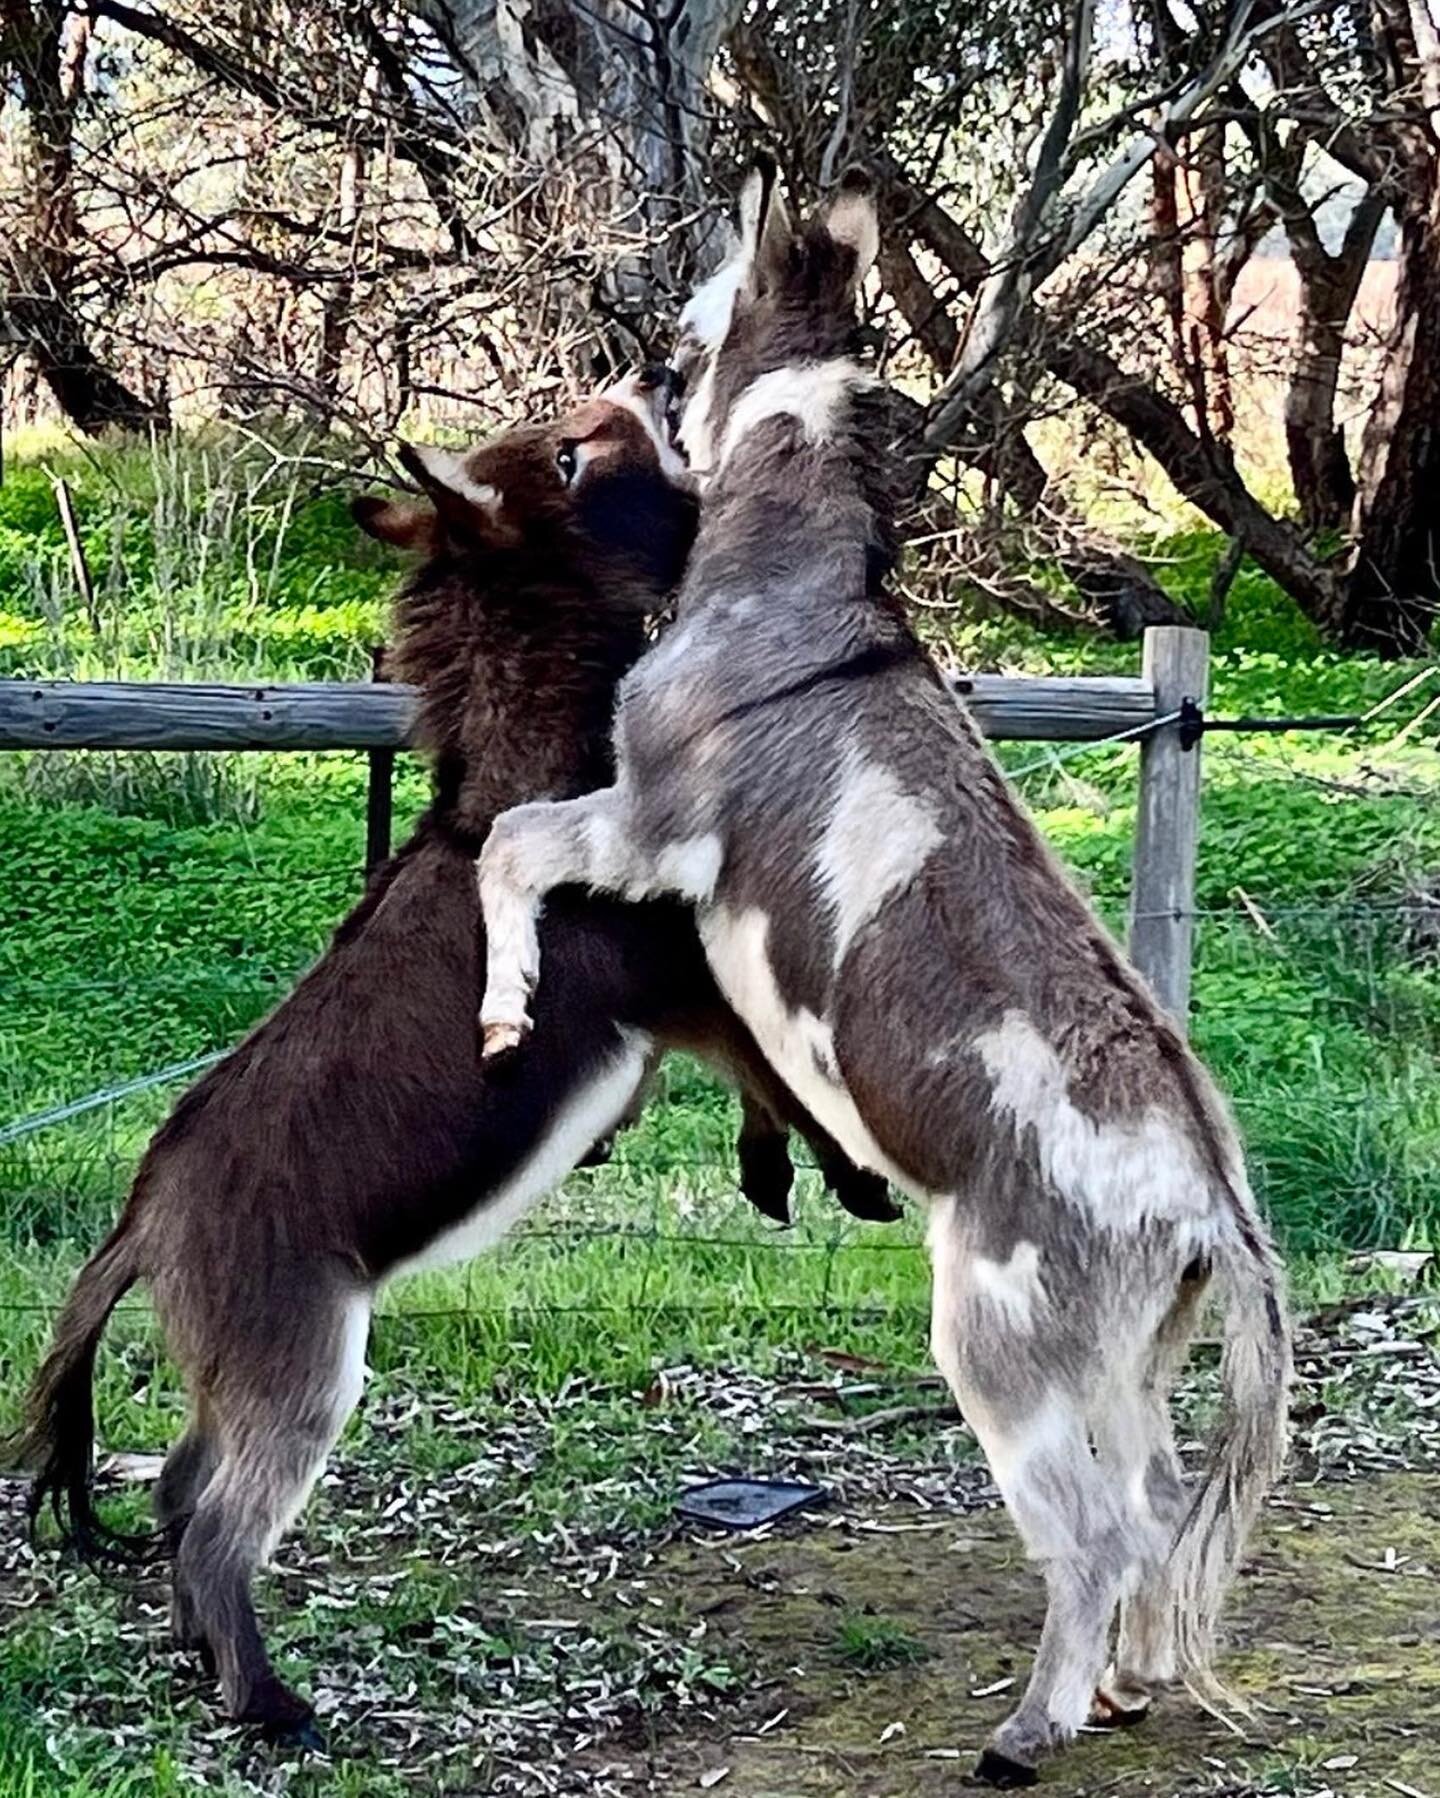 The two boys Paddy &amp; Monty love to play - especially when they&rsquo;re allowed into the garden ! You can find Paddy on the Shiraz label and Monty on the picpoul. 

#mclarenvale #organicshiraz #shiraz #picpoul #miniaturedonkey #donkey #donkeysofi